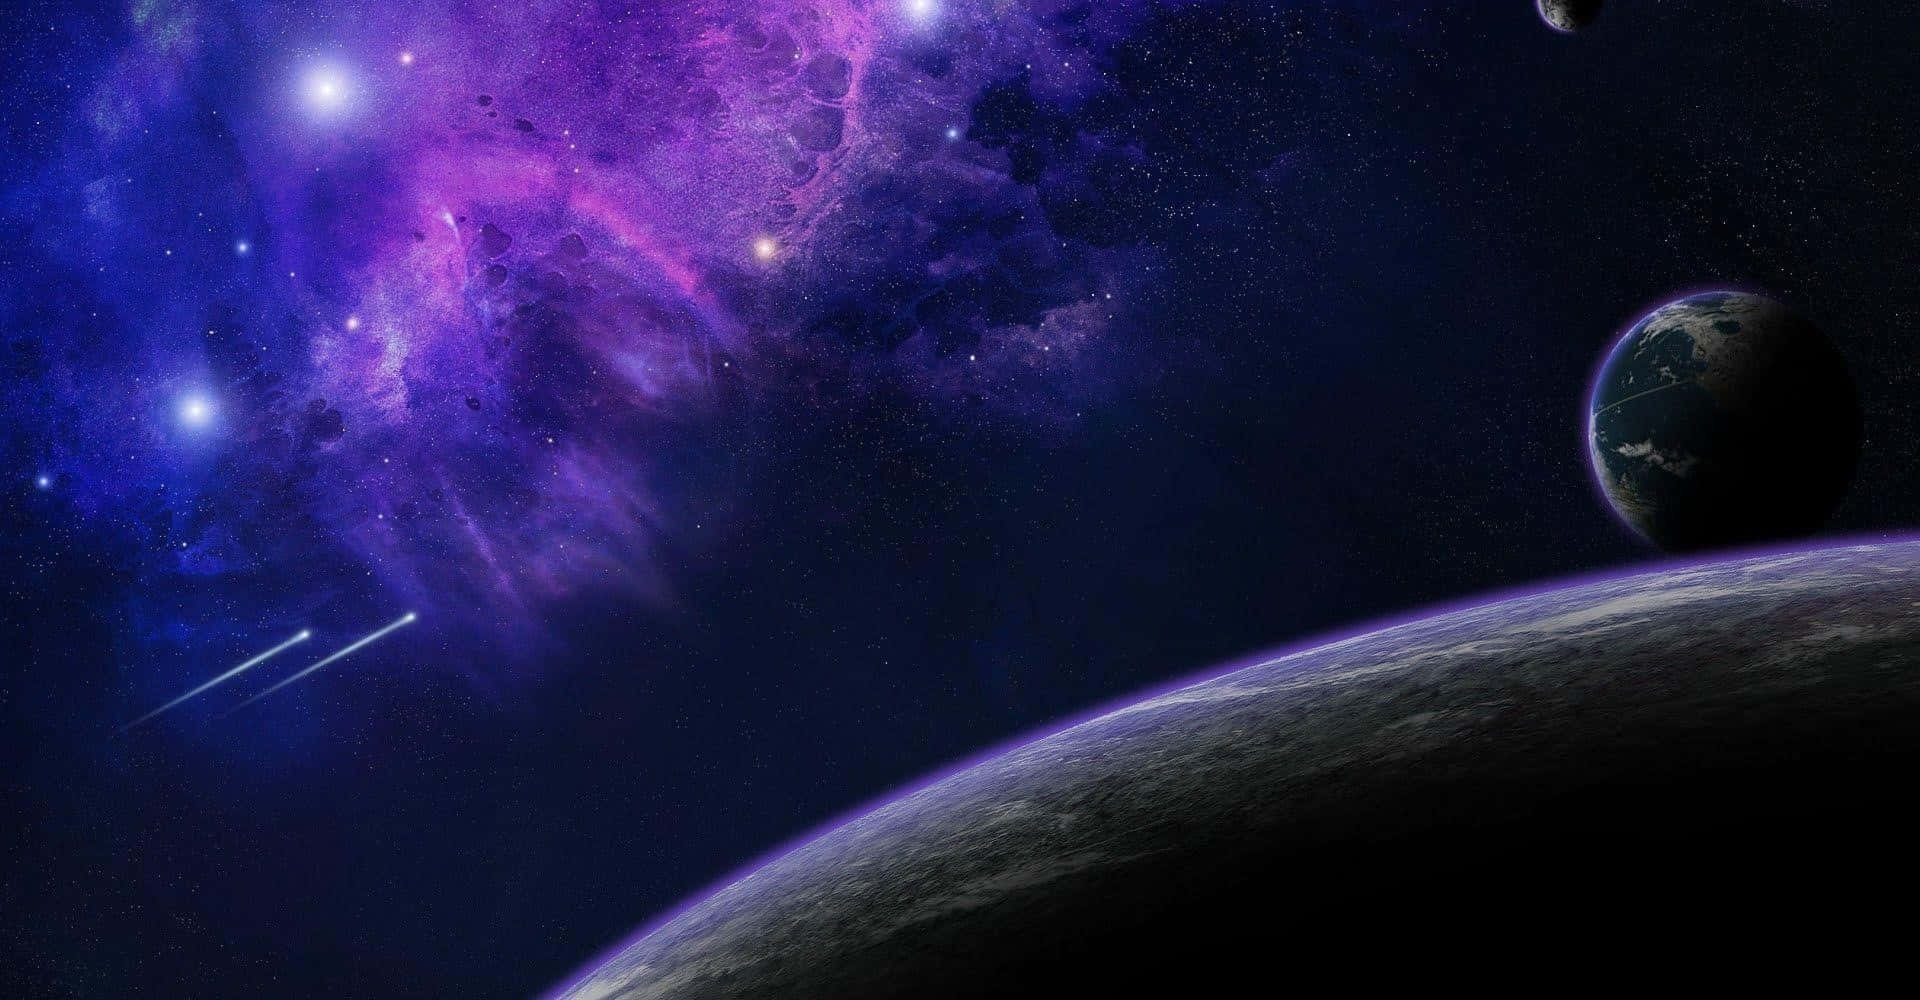 a purple and purple space with planets and stars